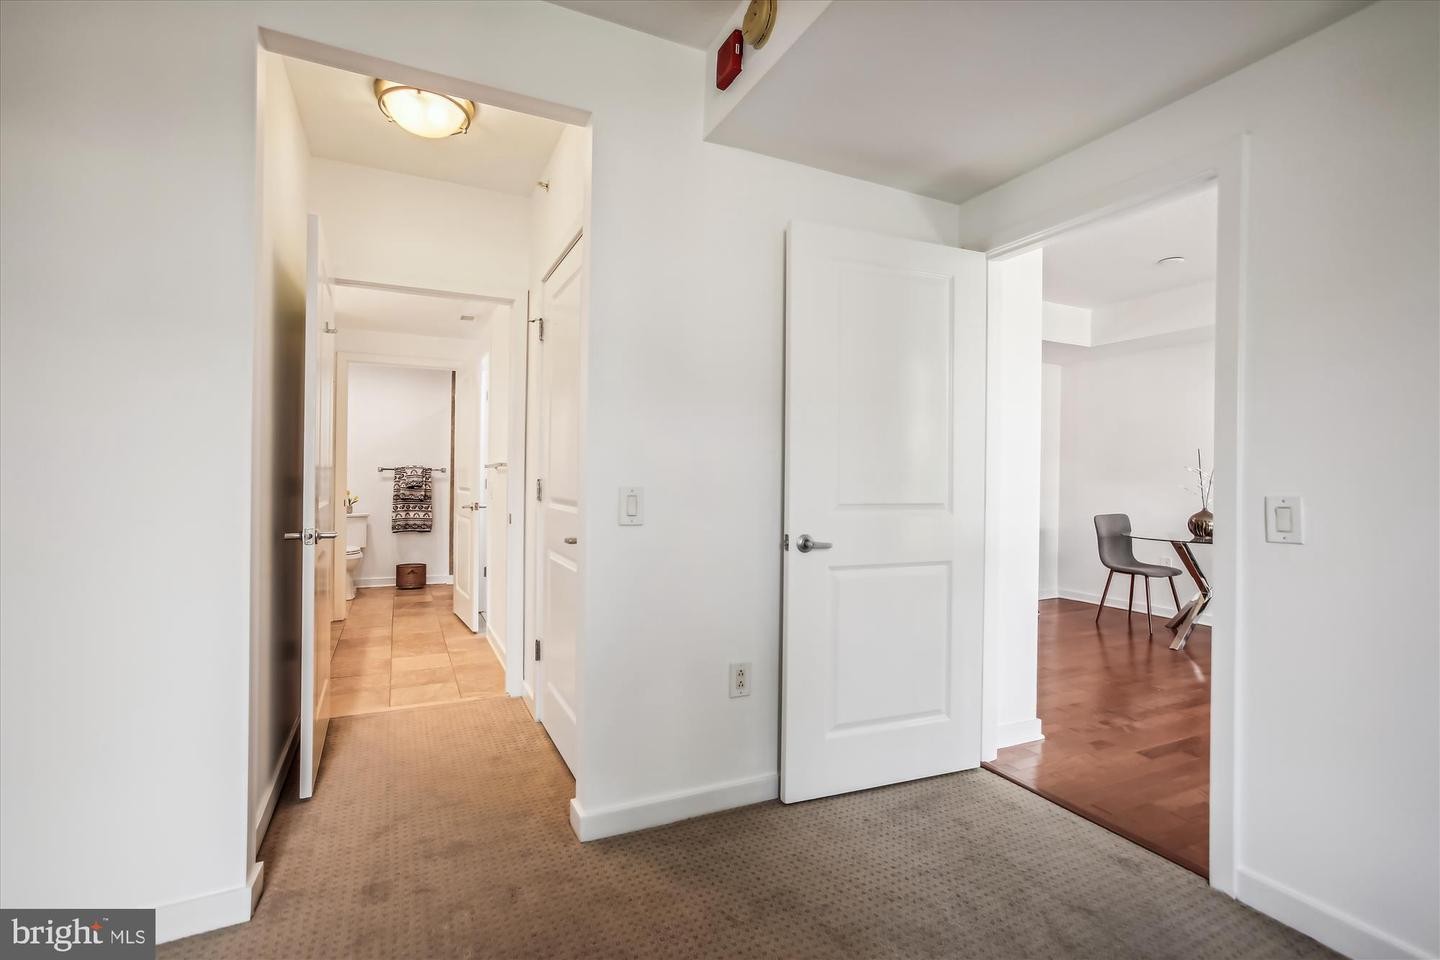 21. 475 K St NW 